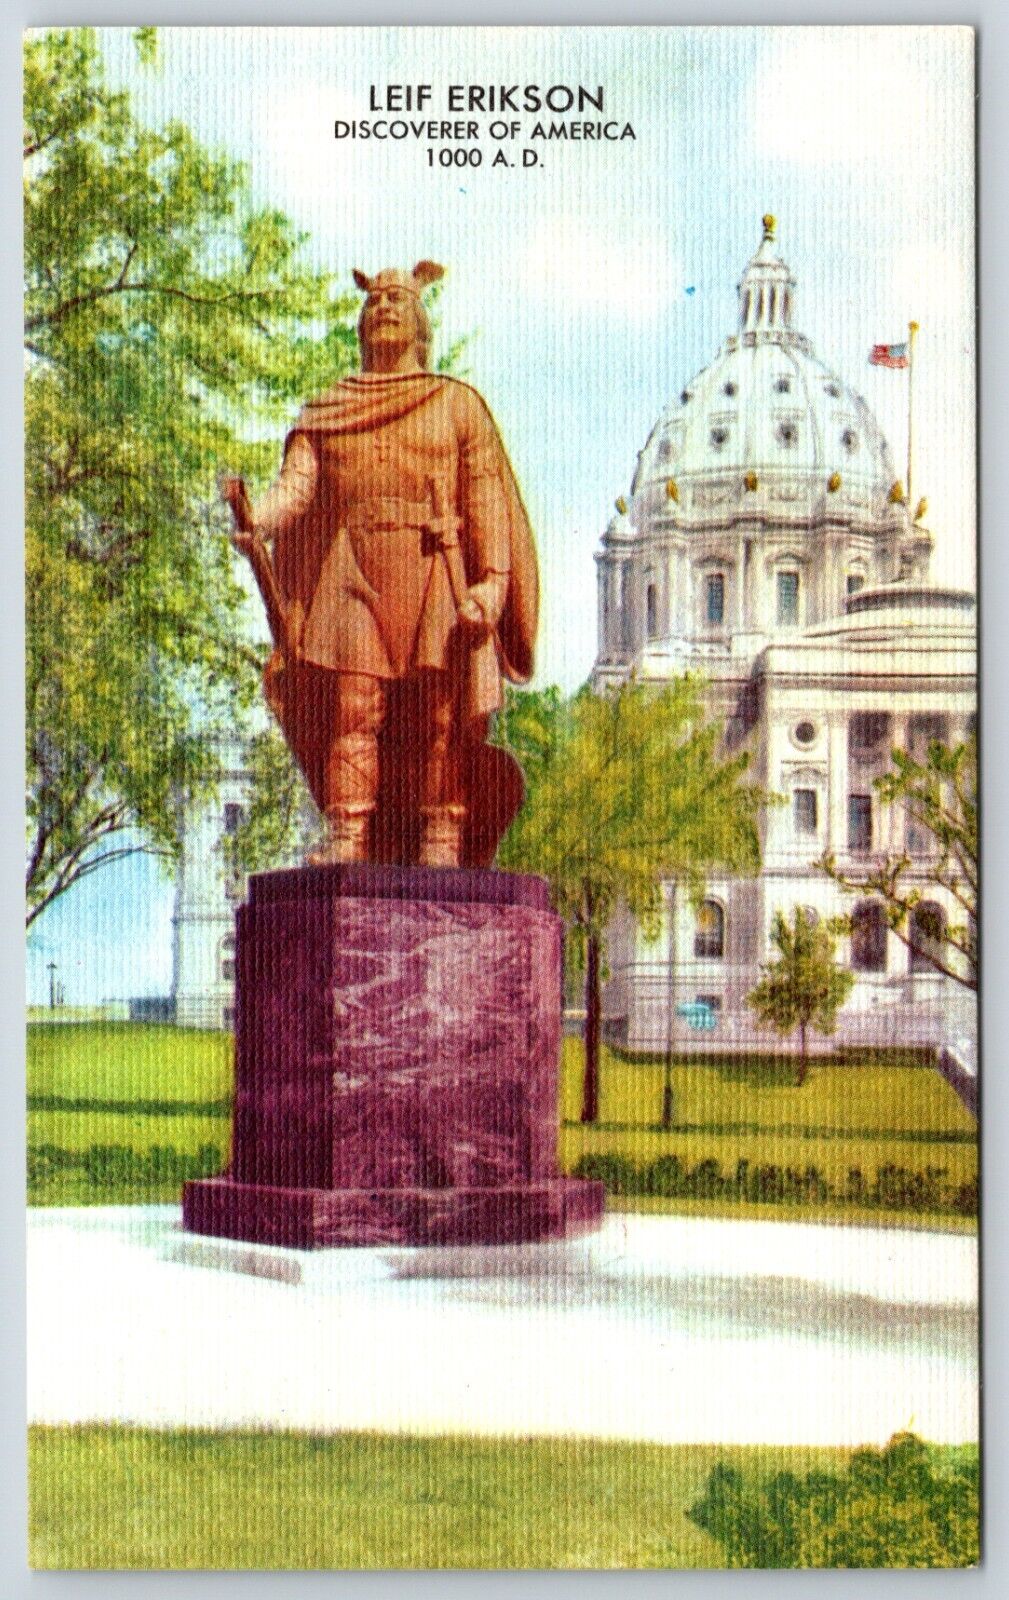 Postcard Leif Erikson Discover Of America 1000 A.D., St. Paul Minnesota Unposted